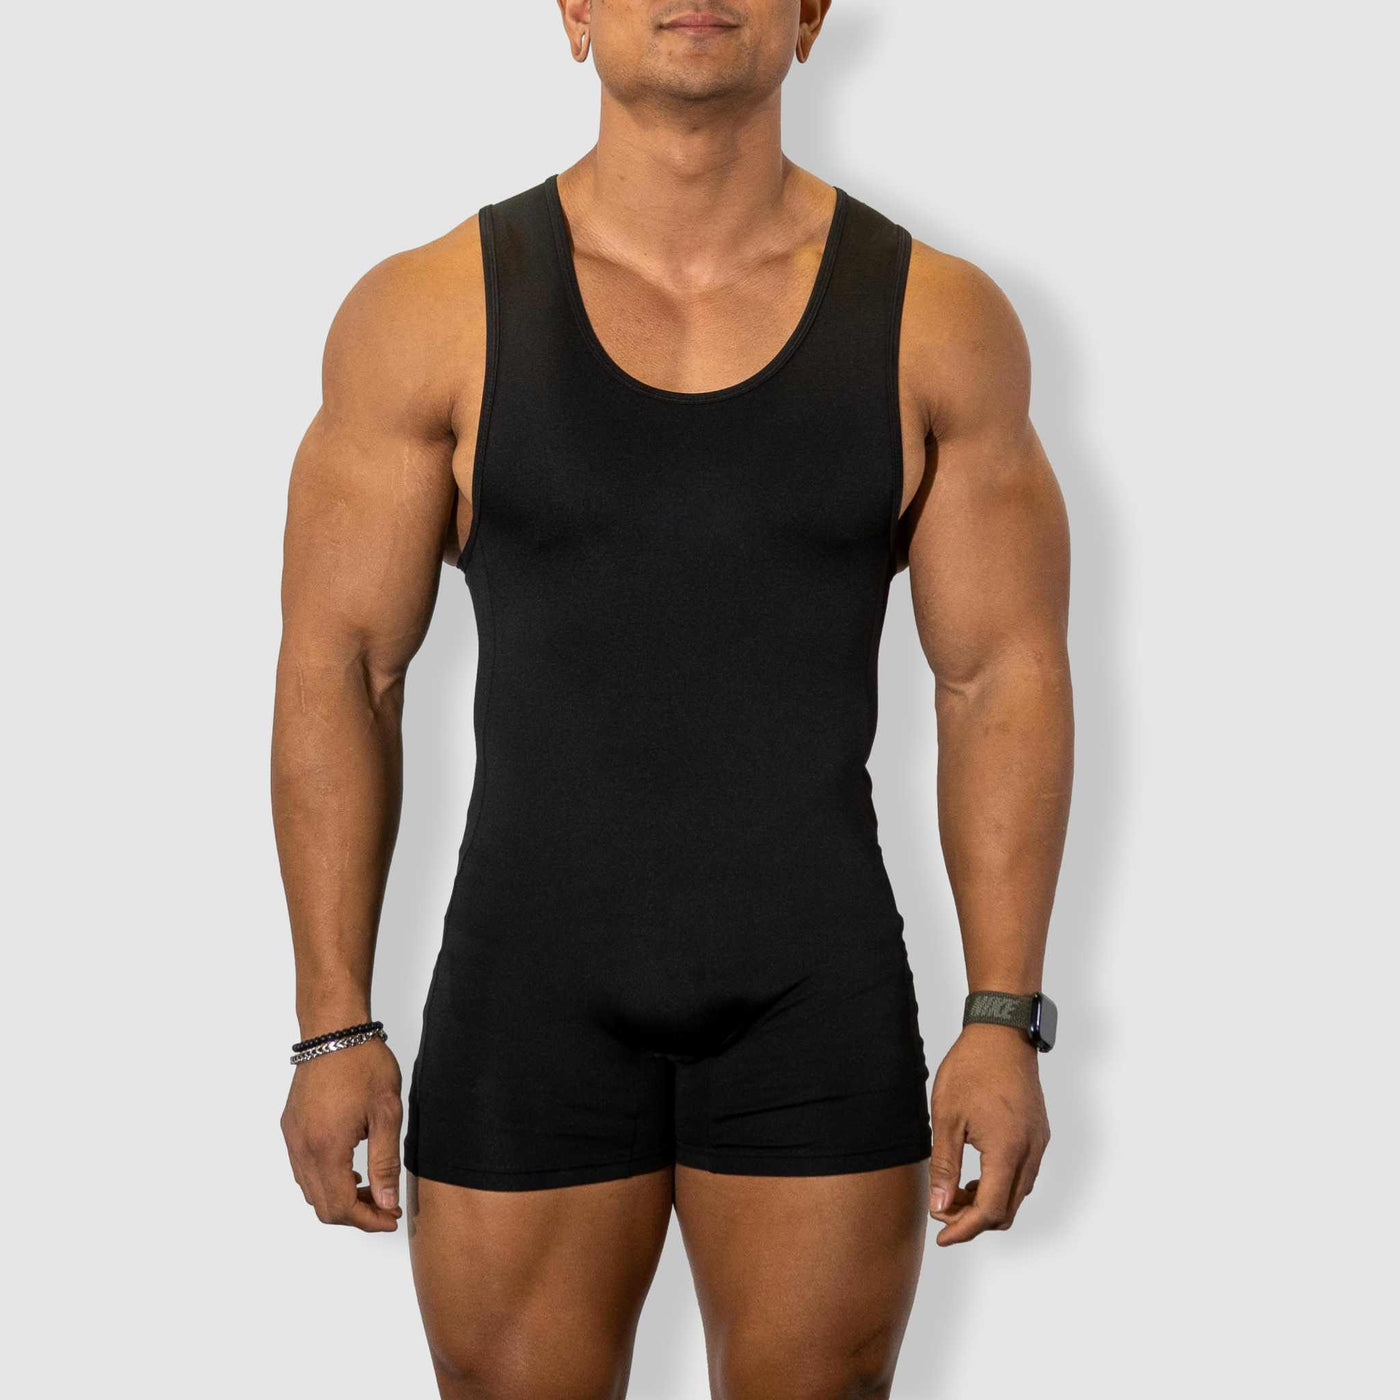 Strength Shop Powerlifting Singlet - UNBRANDED - IPF Approved - Strength Shop USA